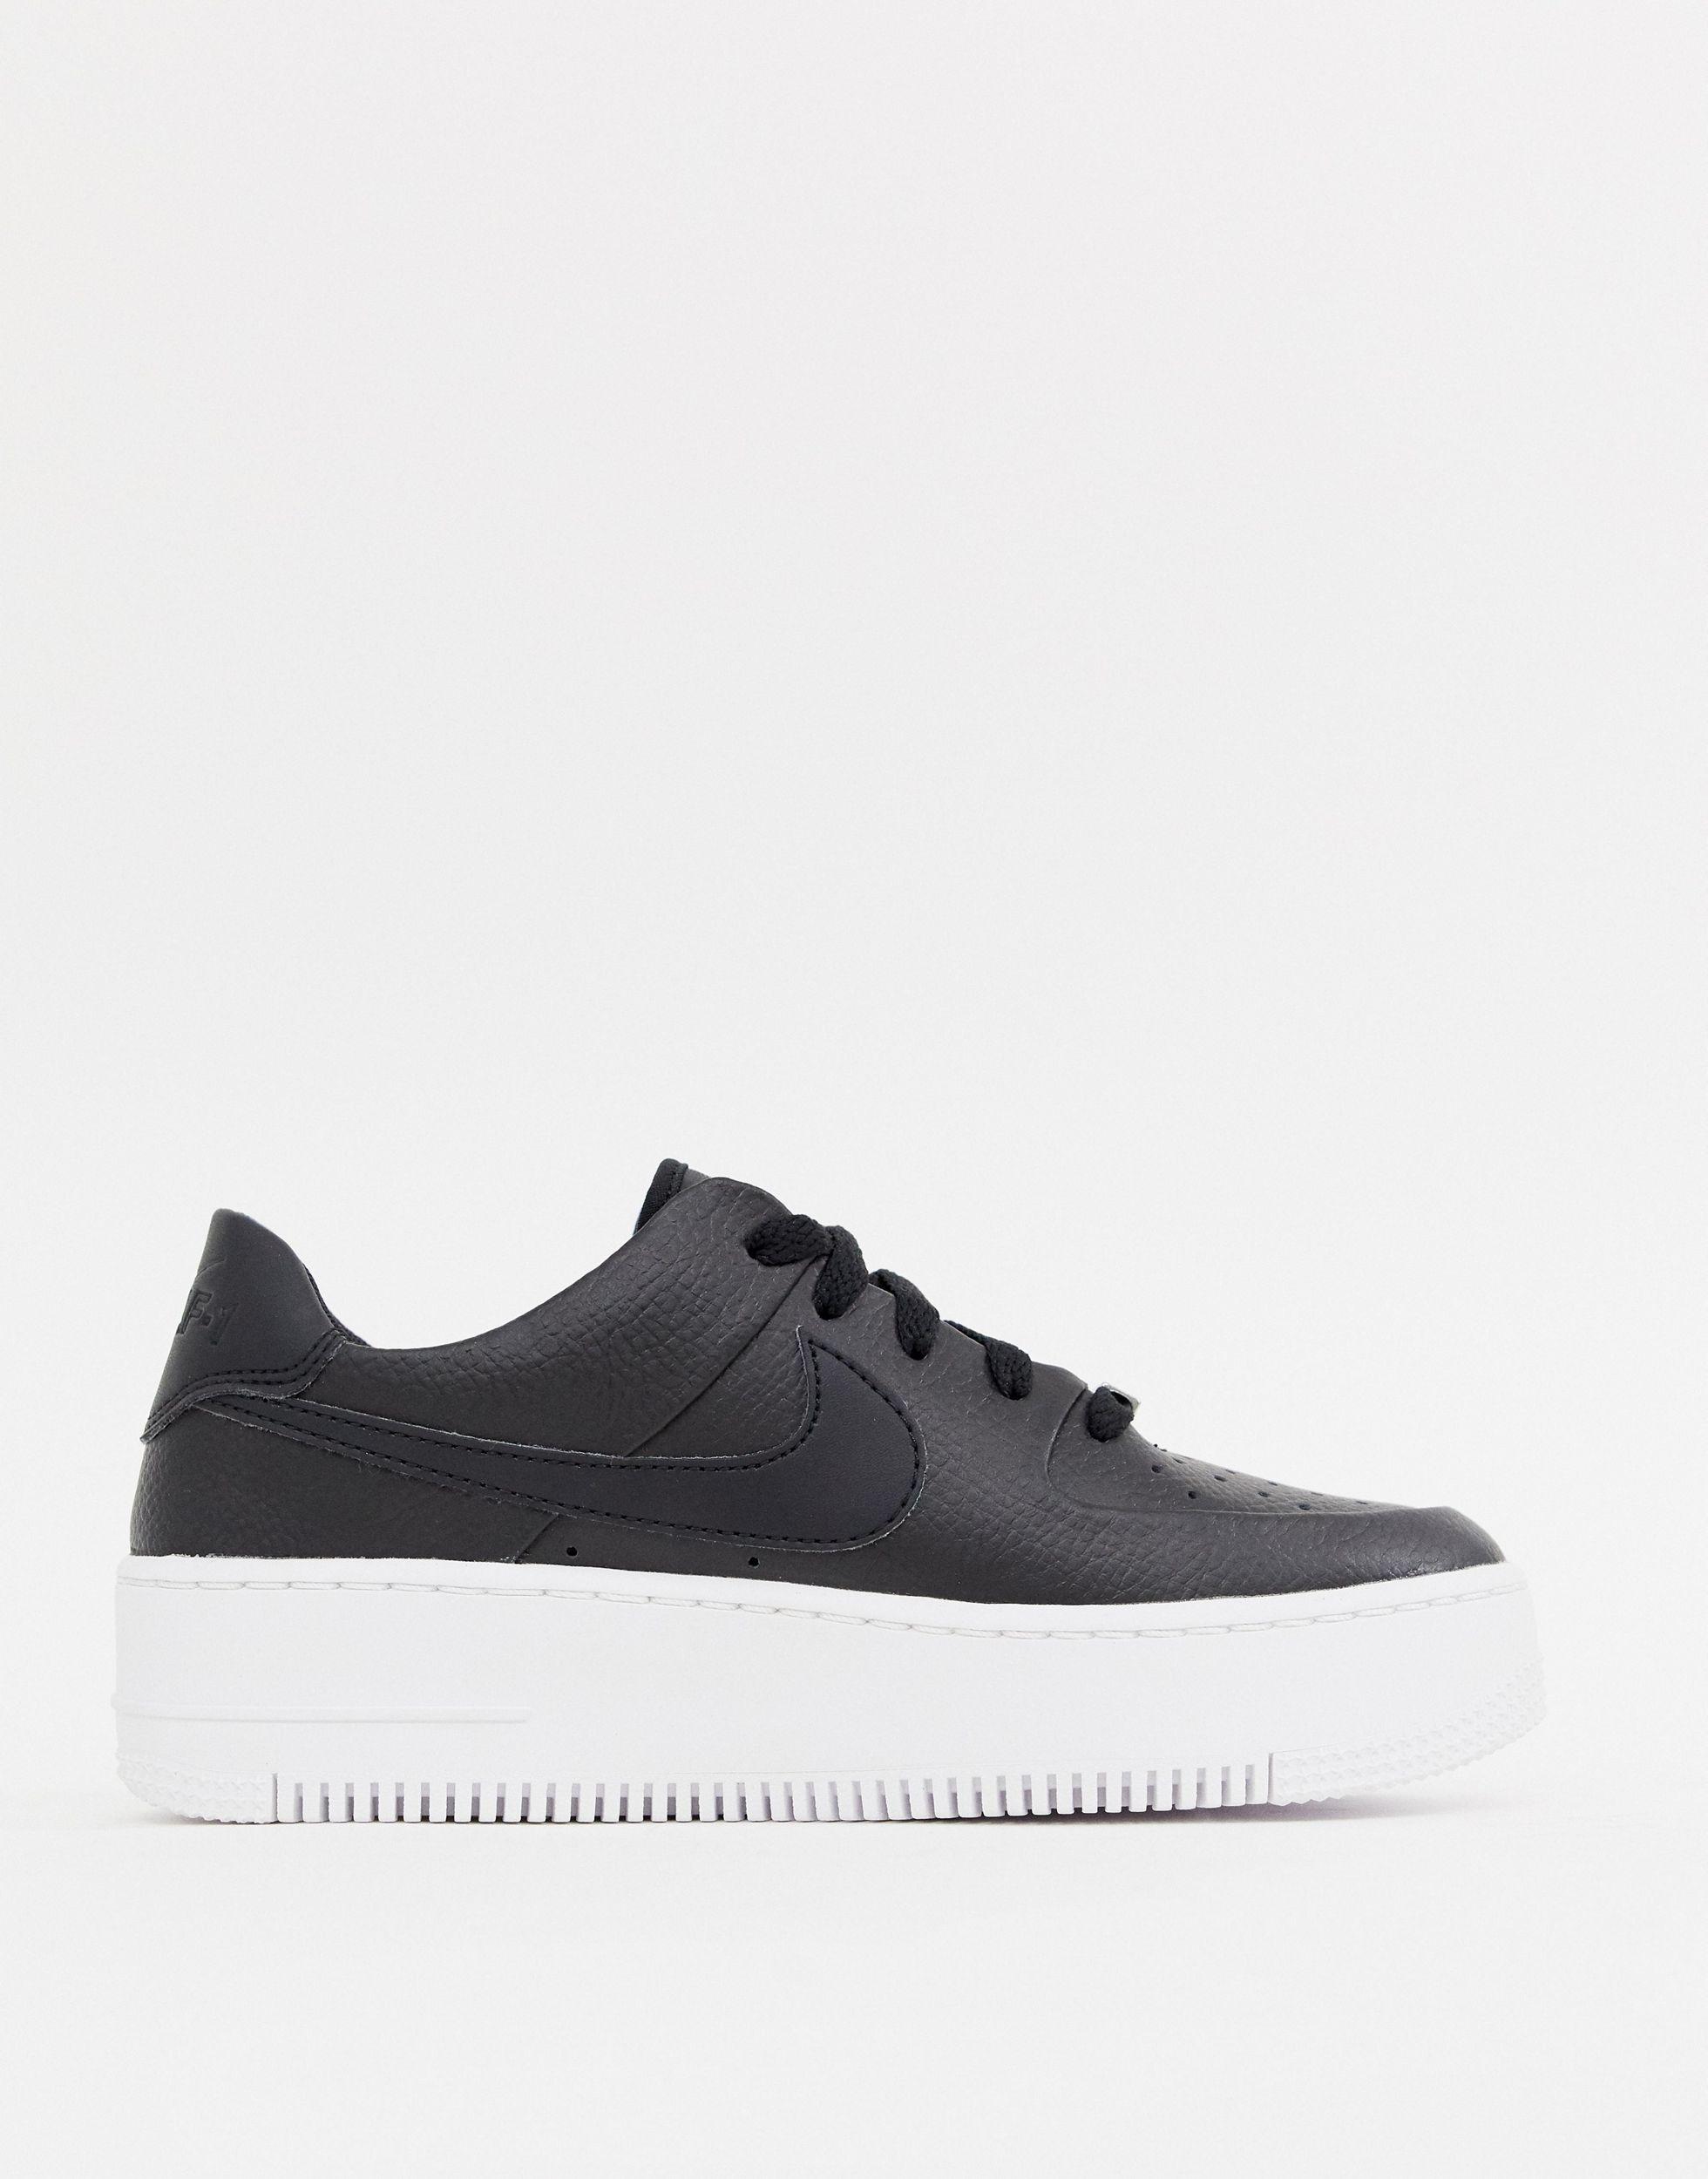 Nike Leather Air Force 1 Sage Low Basketball Shoes in Black/White ...